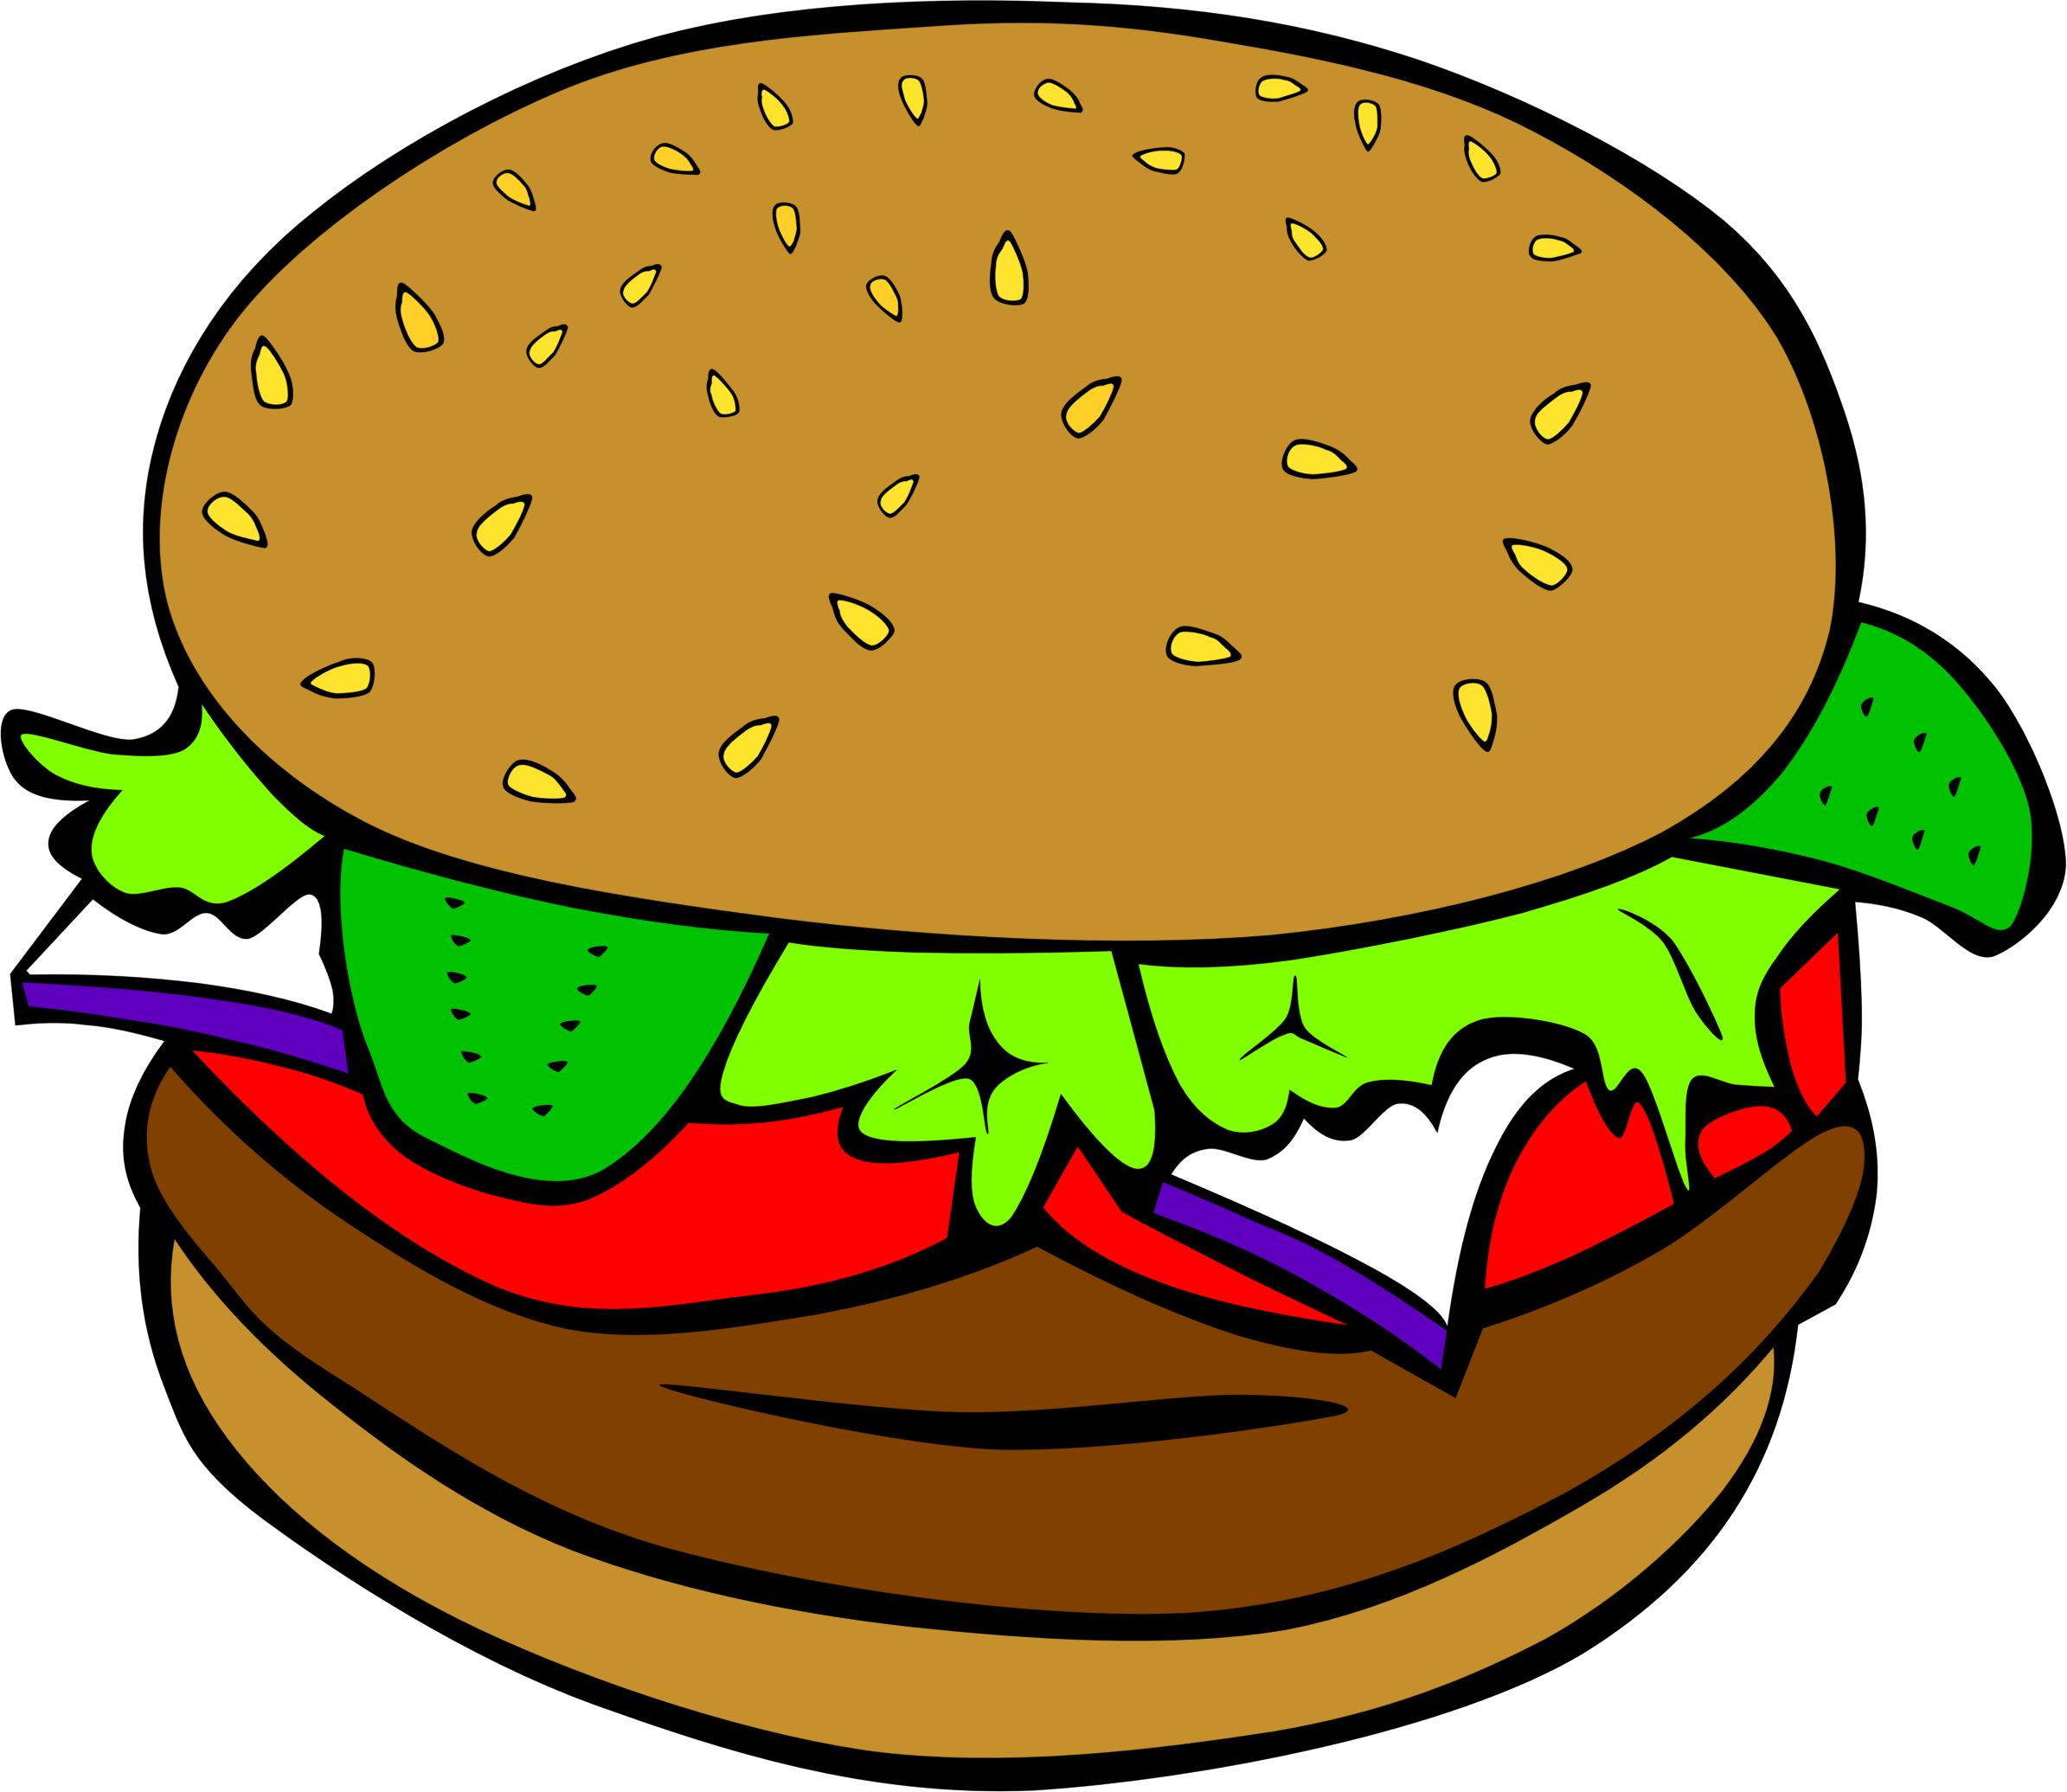 Fast Food, Lunch-Dinner, Hamburger no cheese png